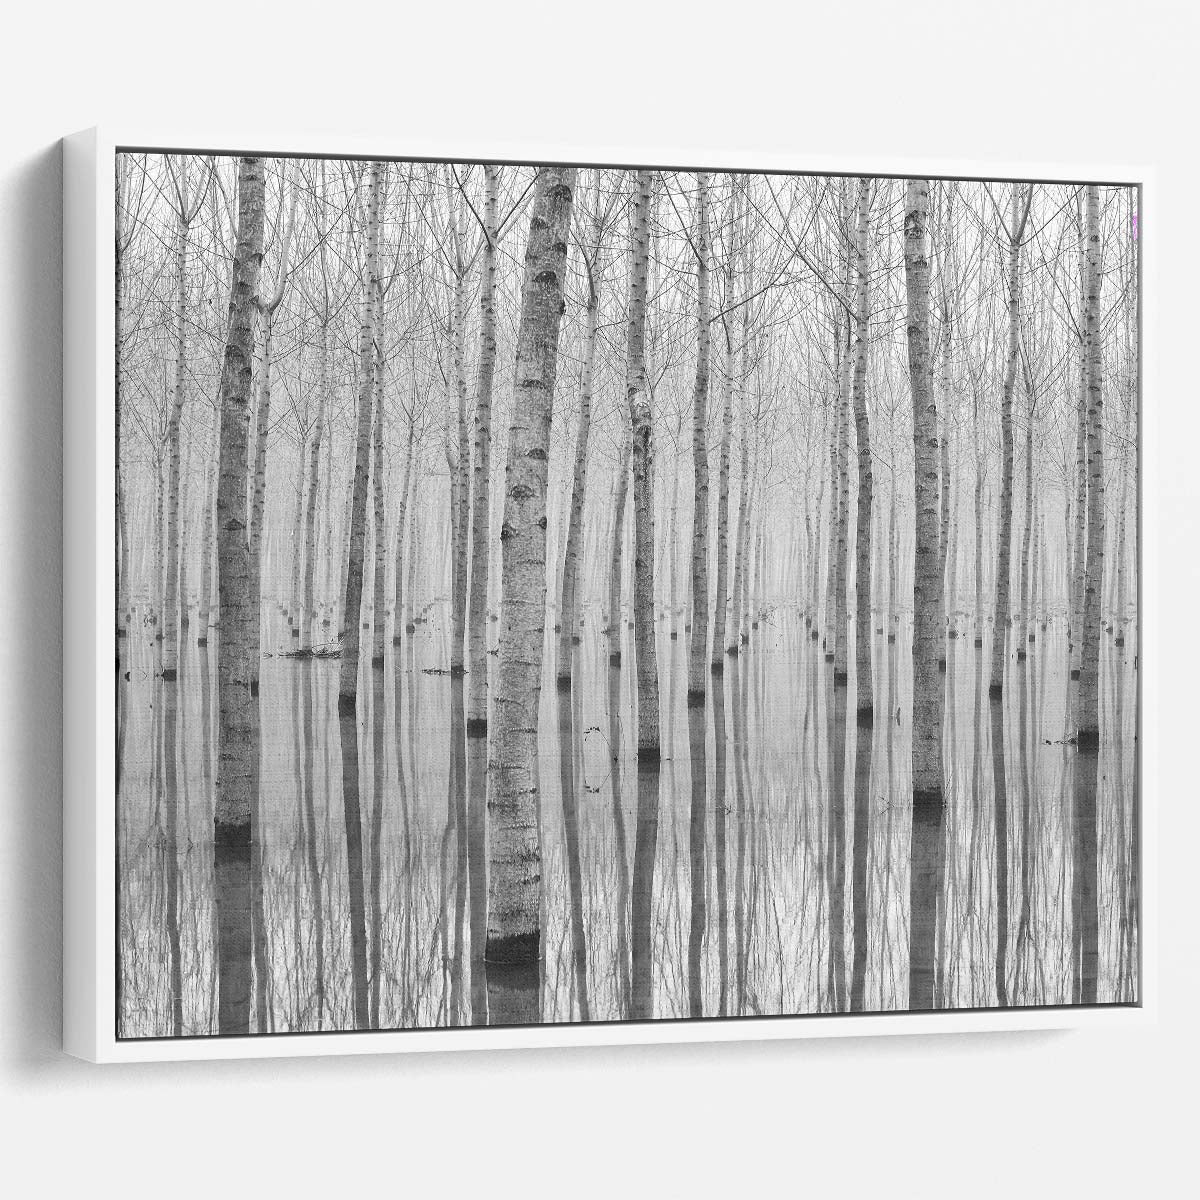 Autumn Birch Forest Reflections Monochrome Wall Art by Luxuriance Designs. Made in USA.